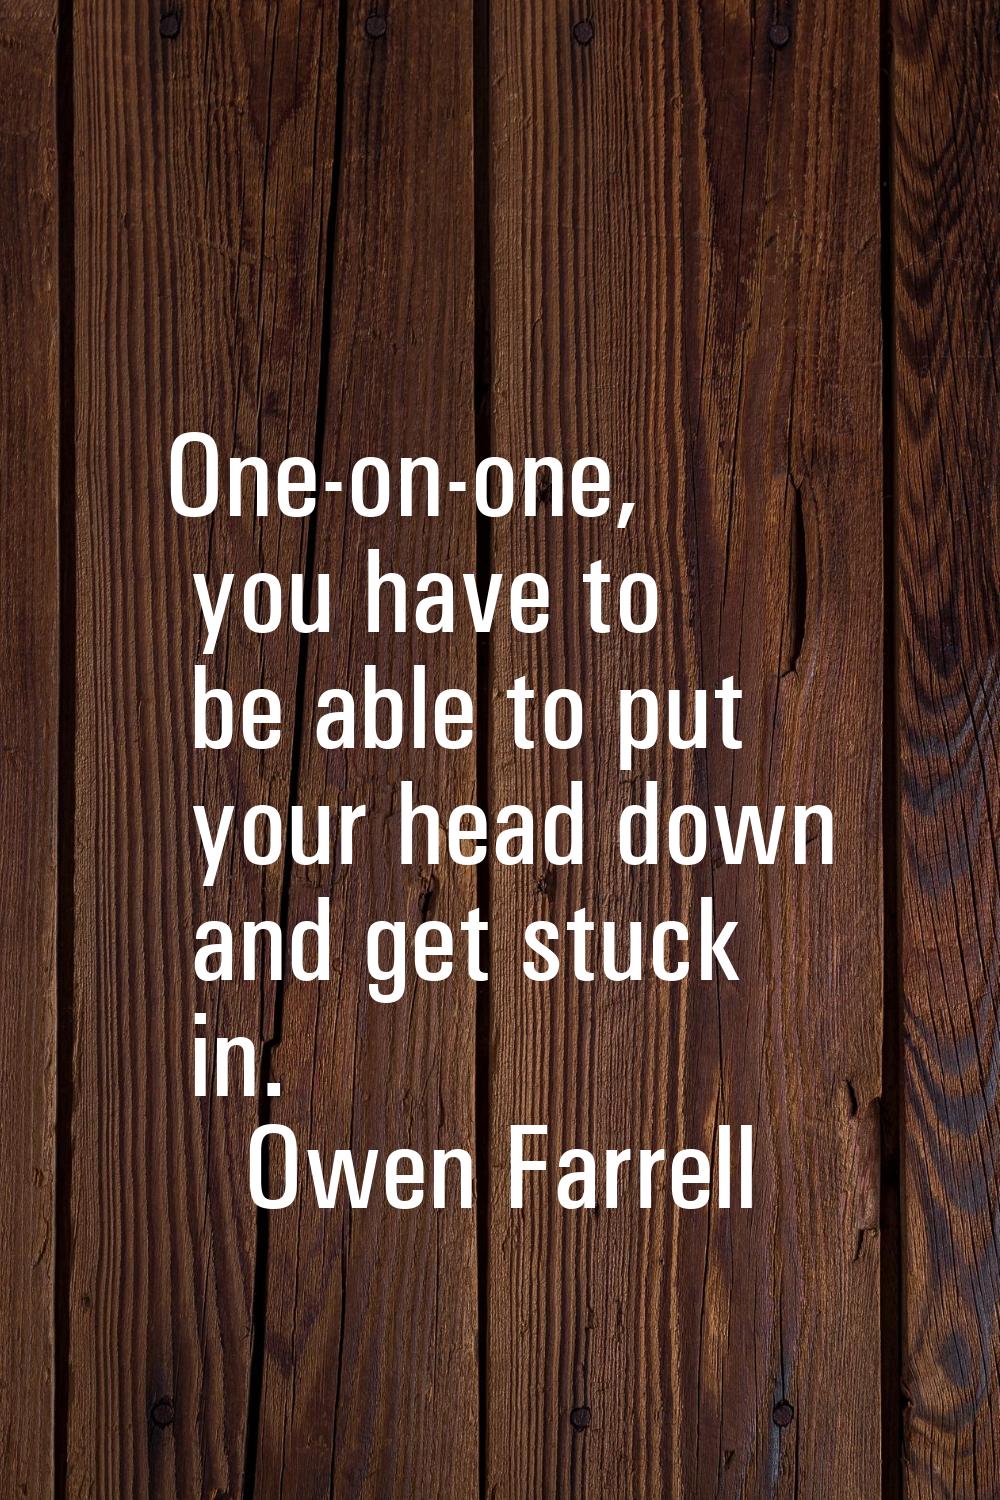 One-on-one, you have to be able to put your head down and get stuck in.